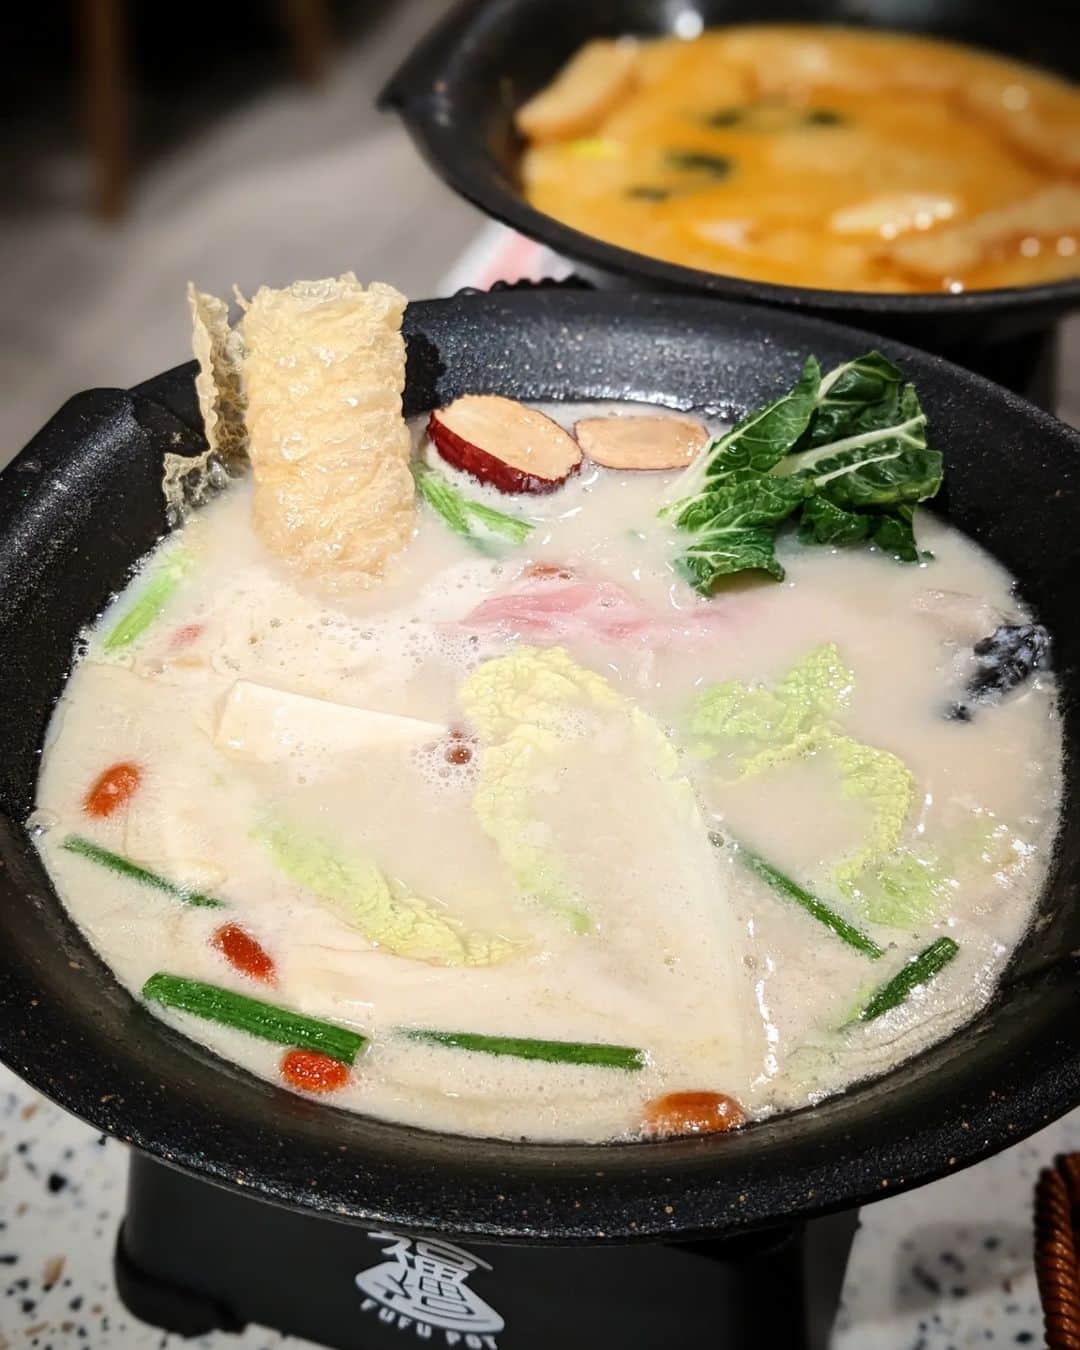 Li Tian の雑貨屋のインスタグラム：「the game has changed, completely.  revisited @fufupot recently and found out that it nows offer fully customized hotpots where u can choose ur broth, meats, veggies etc.   But it's not exactly item by item. U choose the ingredients by platters, i.e. Singapore, Korean, Japanese, Atlantis - all complied based on regional favourites. Besides hotpots, there's also hot mains such as Smoked Duck Garlic Fried Rice with Tobiko and side dishes like the cheese balls. Despite the changes, the food standards are still consistent and definitely still a to-go place for individual hotpots.   #sghotpot #singapore #hotpots #fufupot #sgfoodie #sgblog #sgeatout #sgfood」